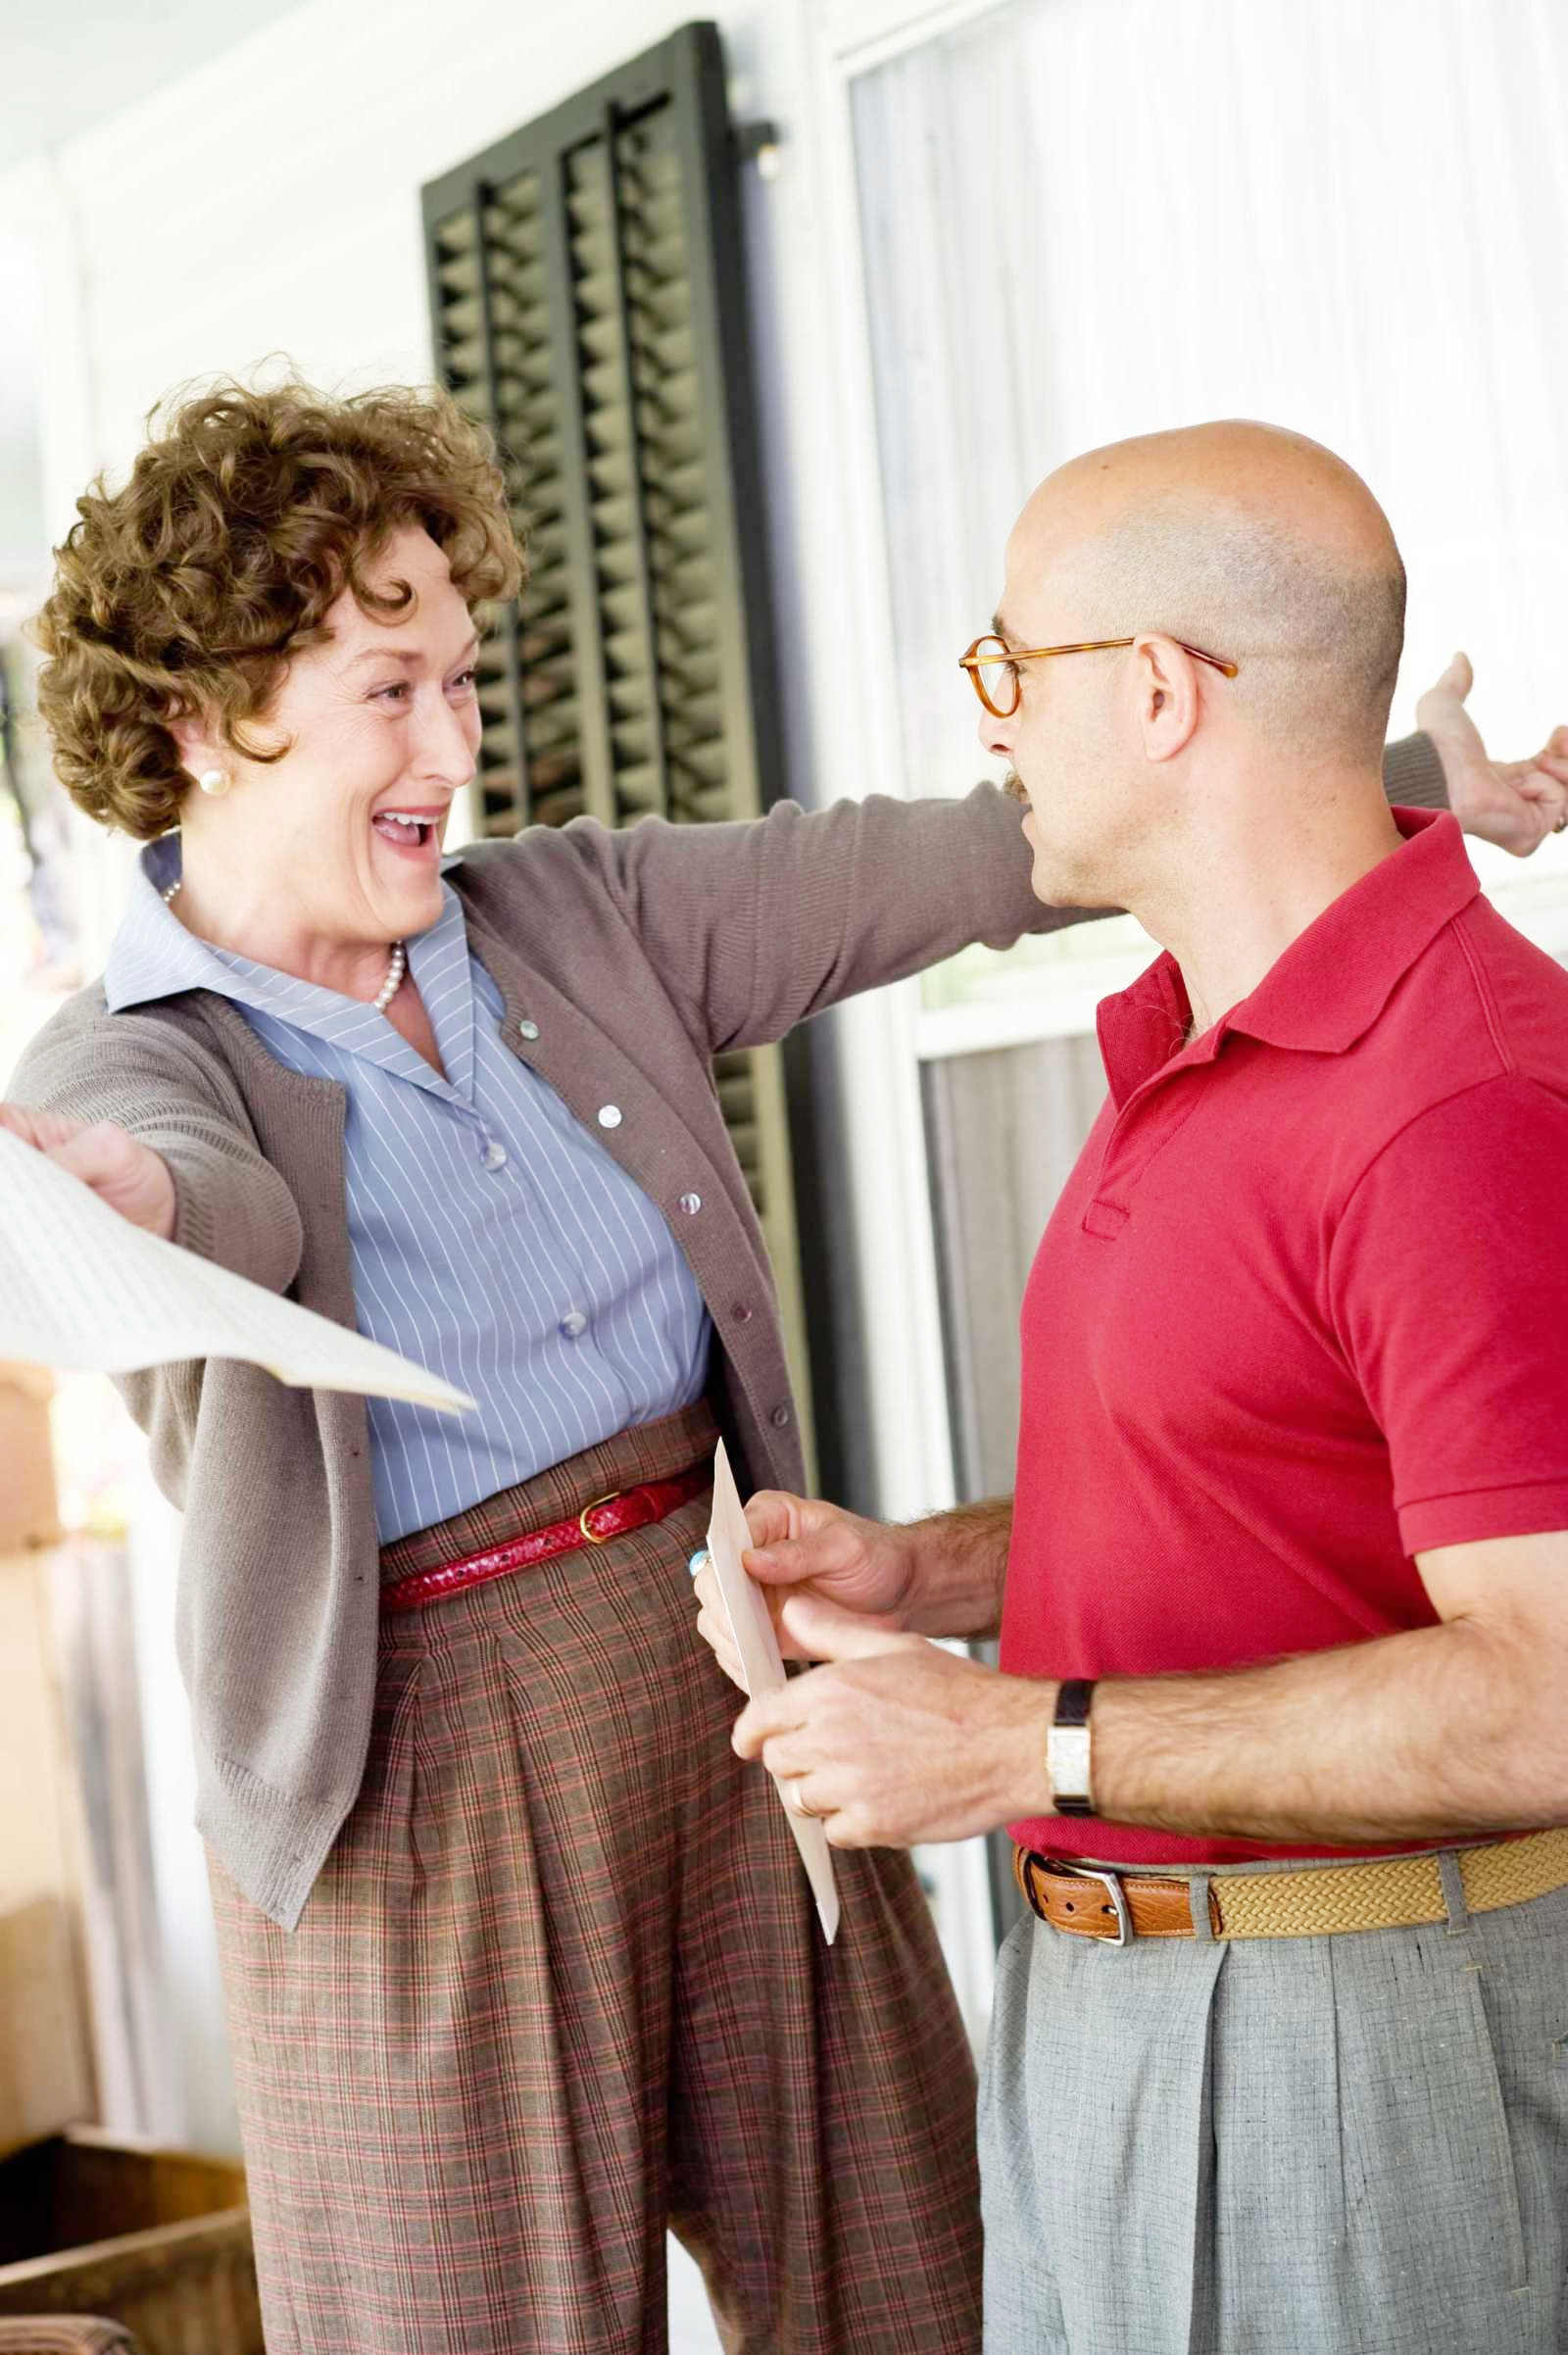 Meryl Streep stars as Julia Child and Stanley Tucci stars as Paul Child in Columbia Pictures' Julie & Julia (2009)